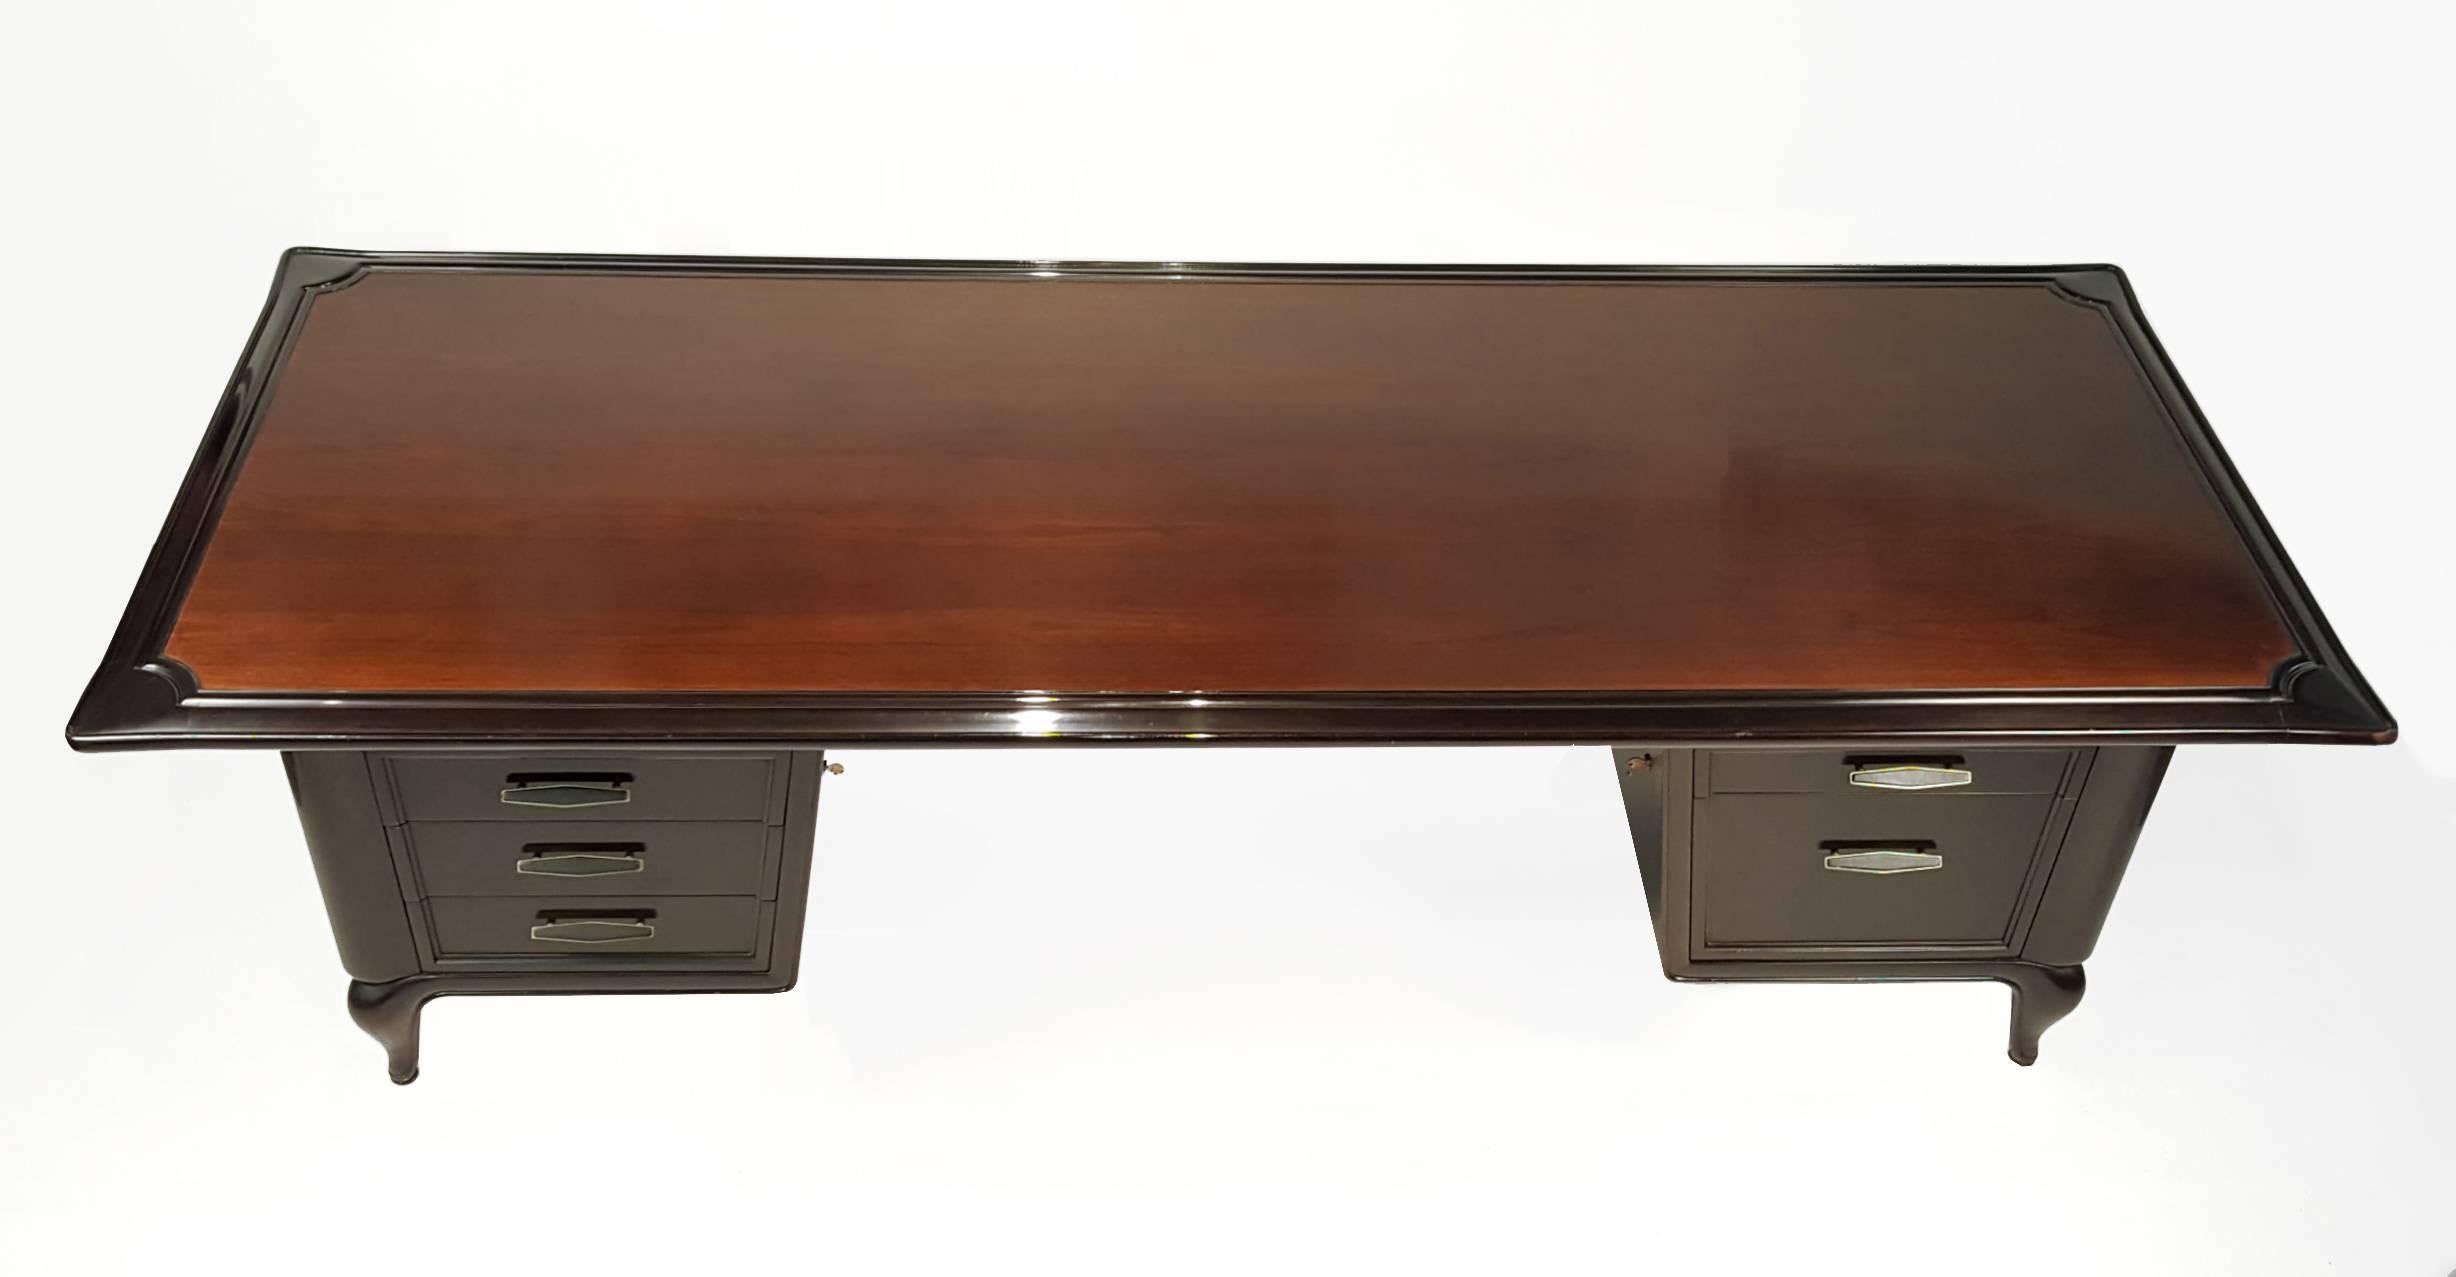 Rare premier executive desk designed by Maurice Bailey for Monteverdi & Young of Los Angeles. These desks were made famous by bankers and movie executives in California throughout the 1960s. This Luxurious example was custom ordered for the private